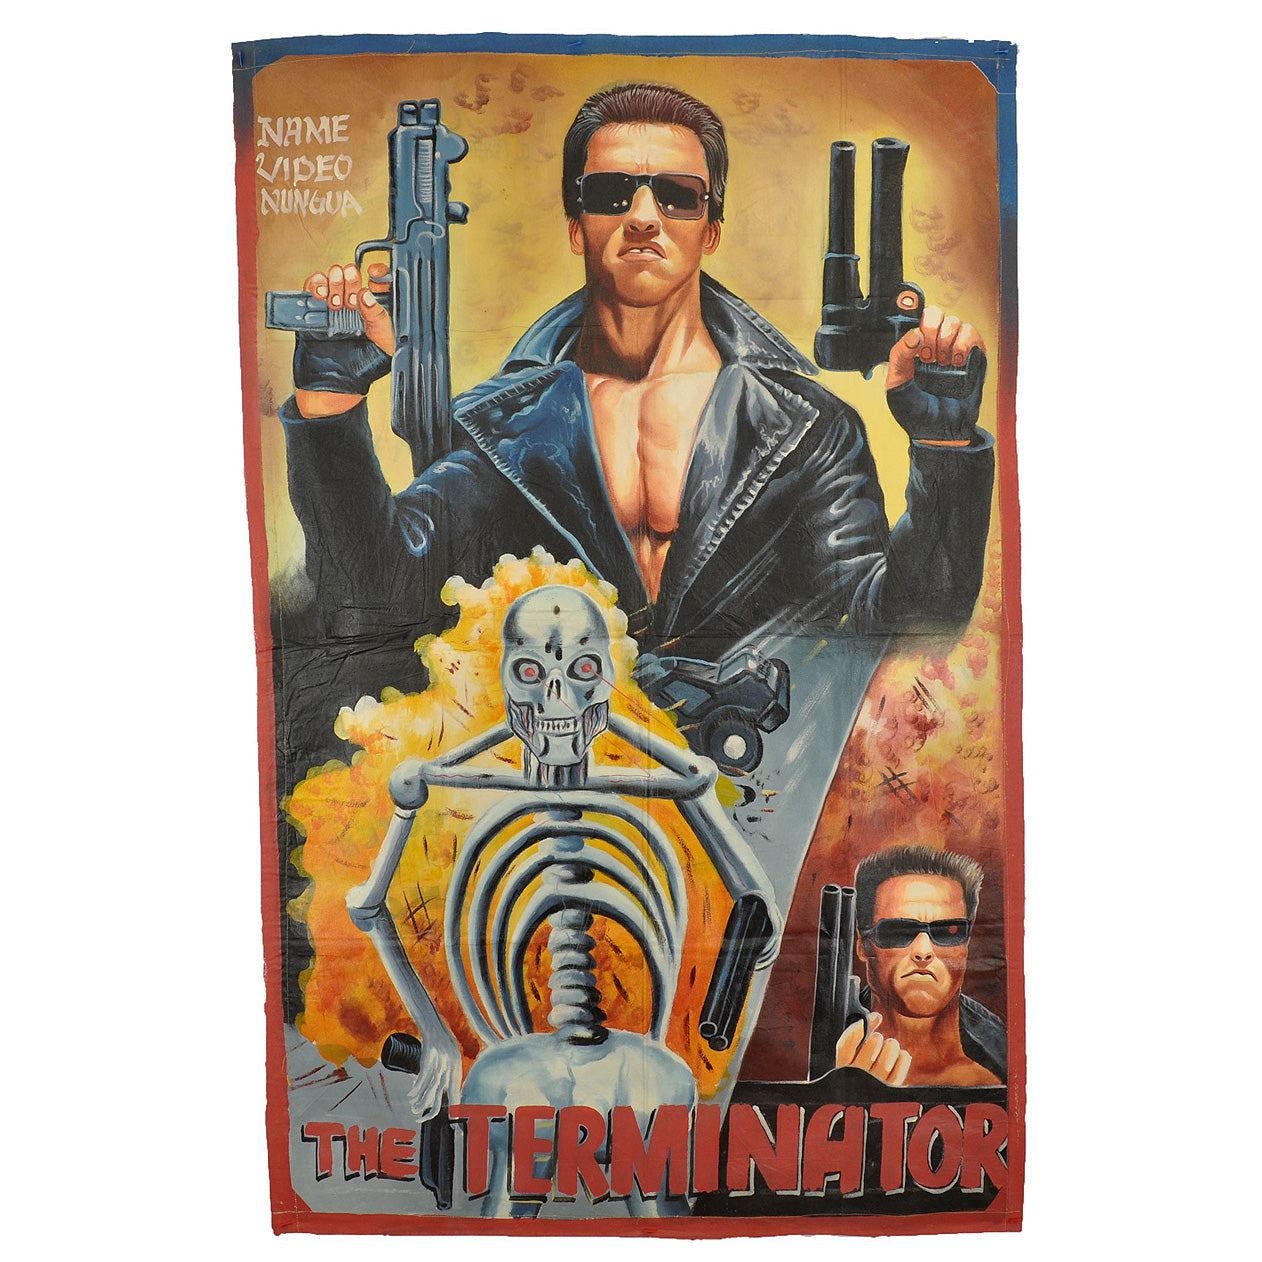 THE TERMINATOR MOVIE POSTER HAND PAINTED IN GHANA FOR THE LOCAL CINEMA